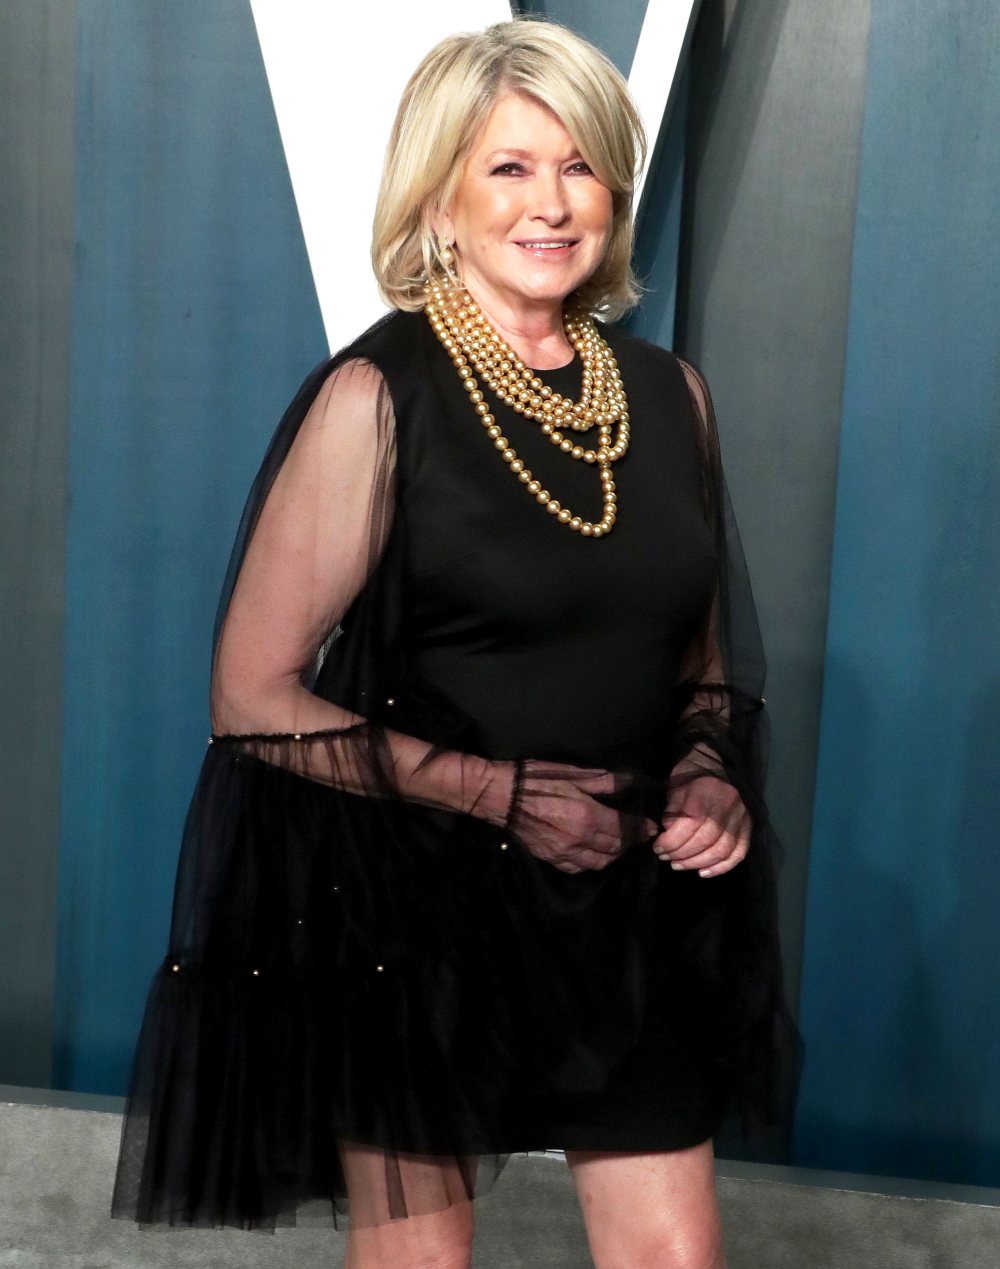 Martha Stewart Go-To Cheat Food Is Not What You Would Expect